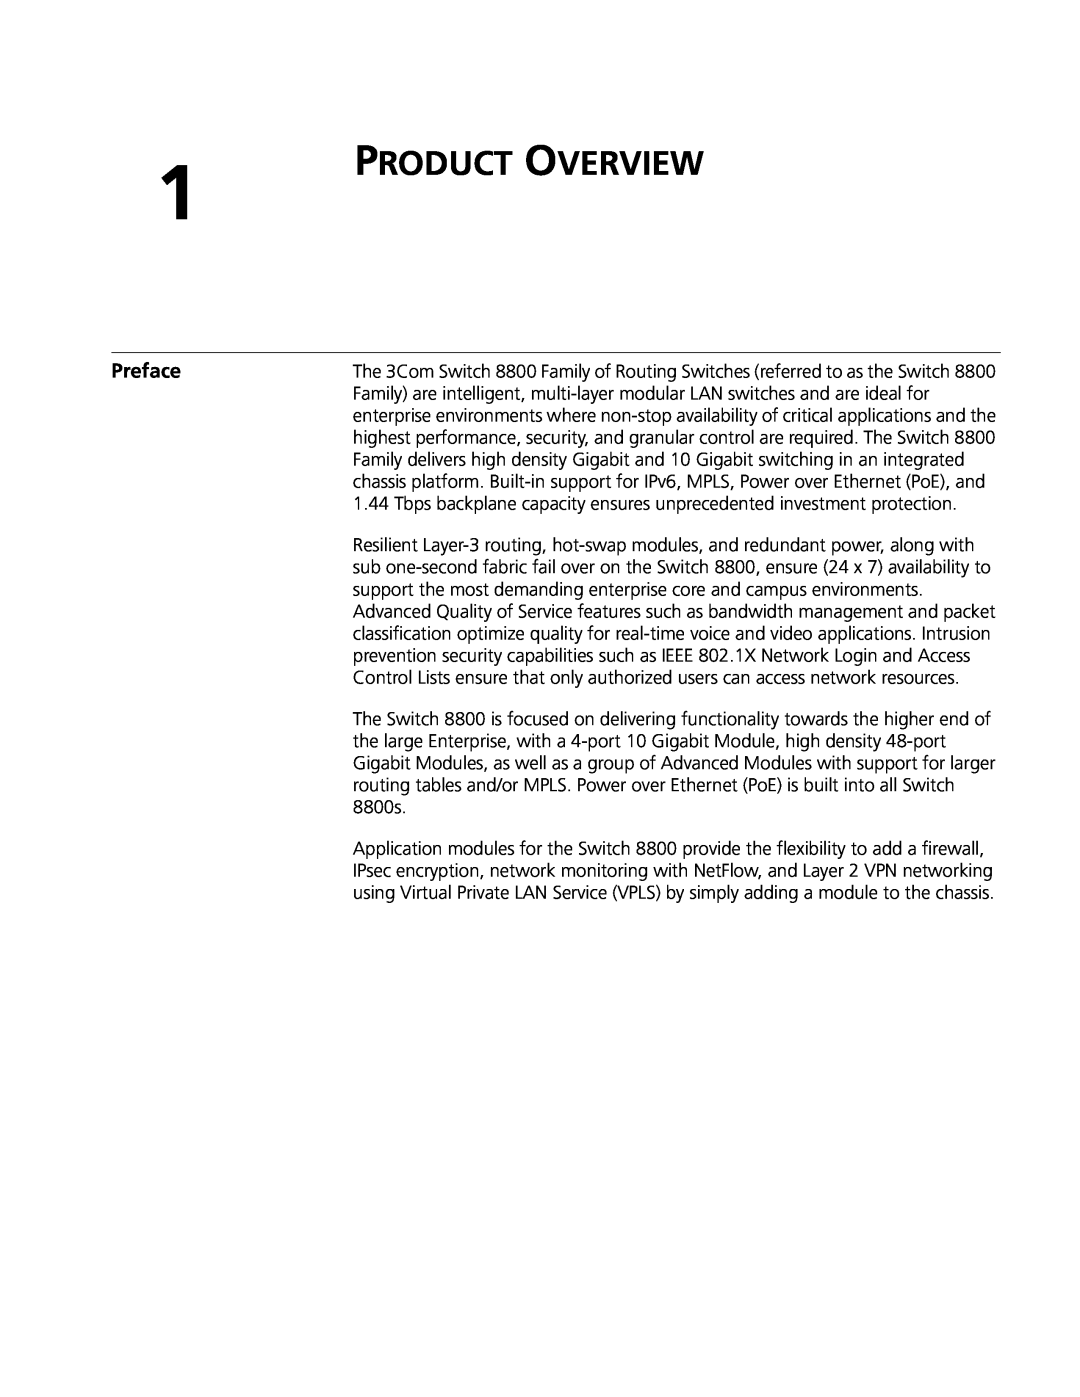 3Com 8814, 8807, 8810 manual Product Overview, Preface 